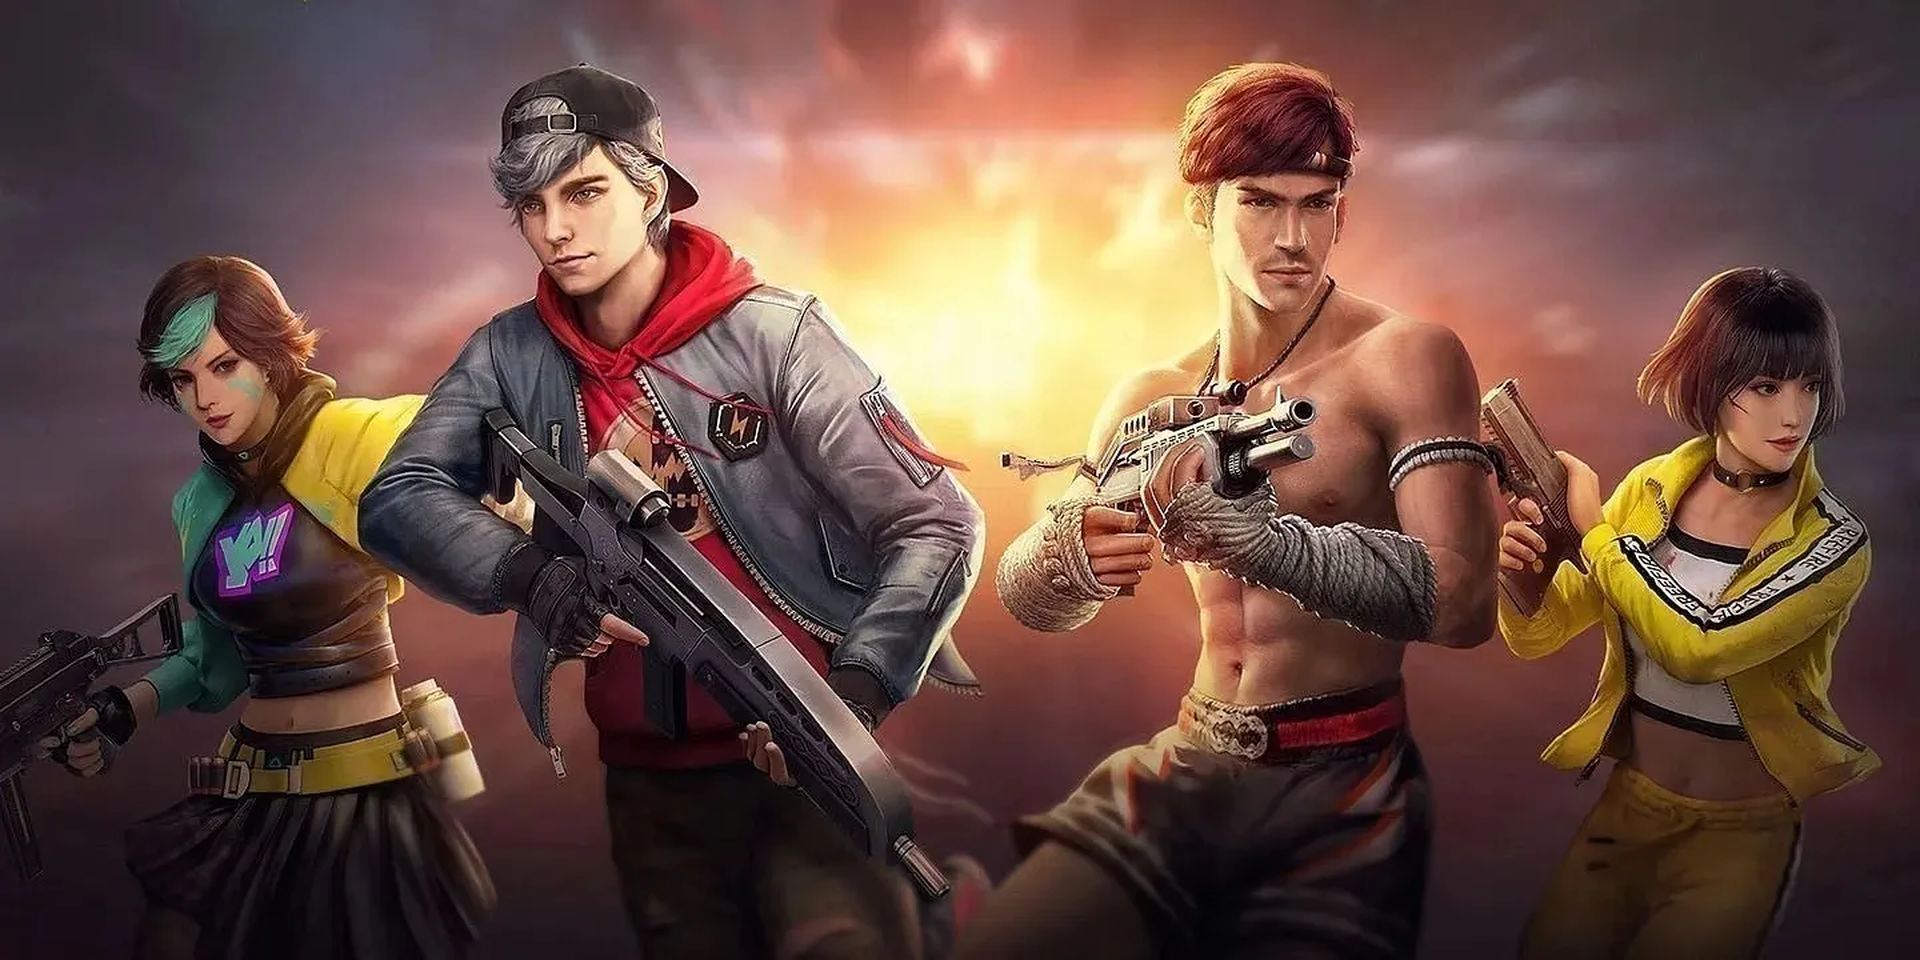 In this article, we are going to be covering how to get unlimited diamonds in Free Fire in 2022, so you don't ever run out of diamonds in the game.